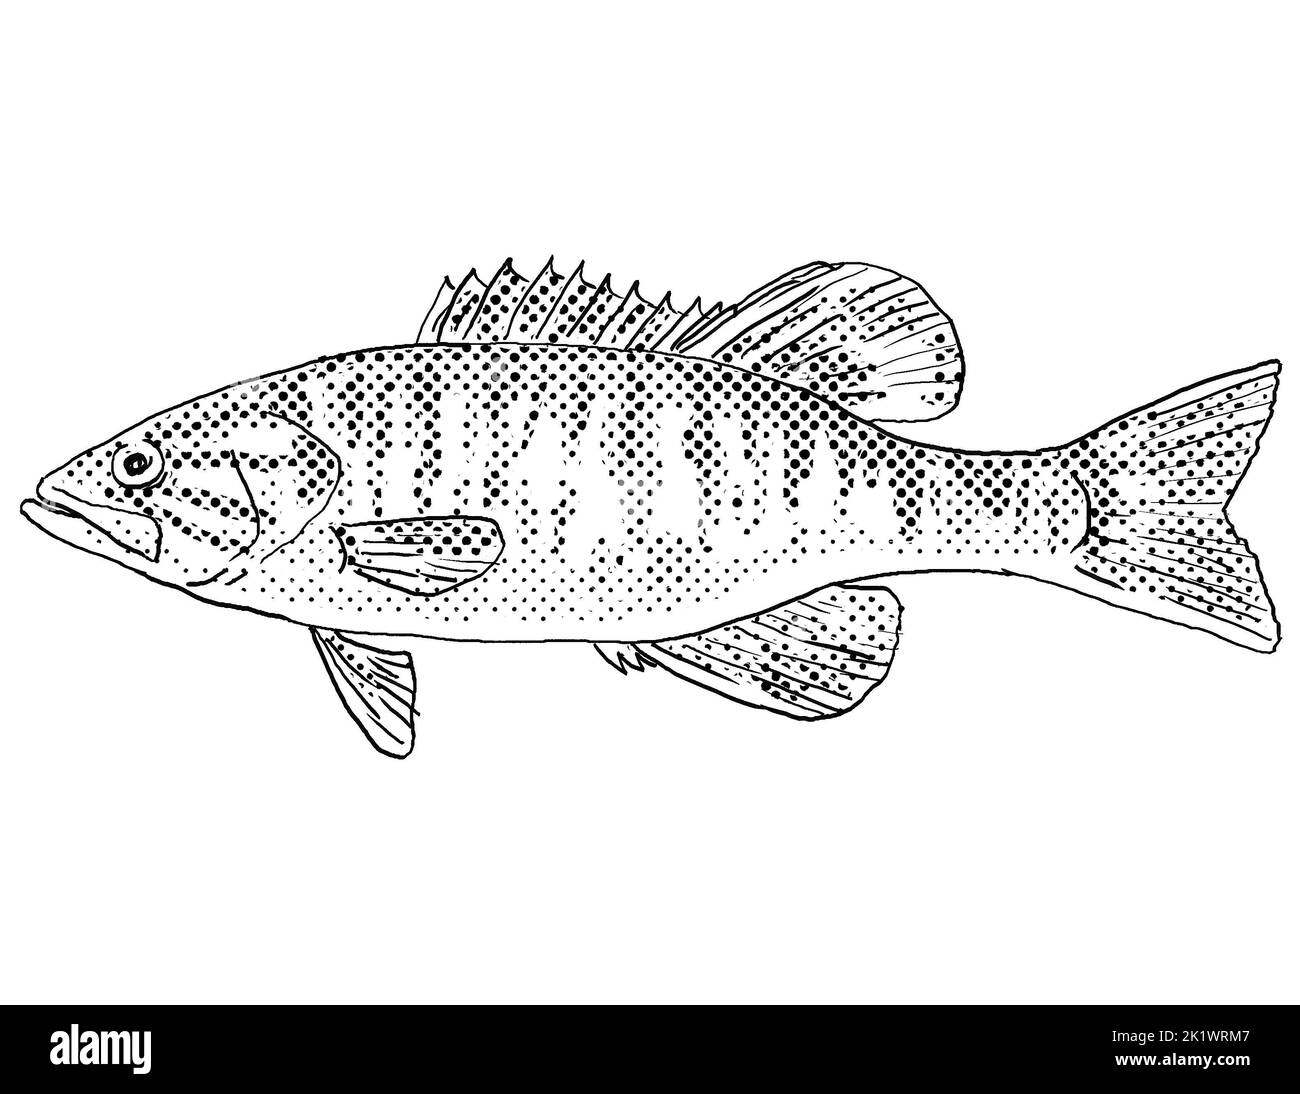 Cartoon style line drawing of a shoal bass or Micropterus cataractae  a freshwater fish endemic to North America with halftone dots shading on isolate Stock Photo